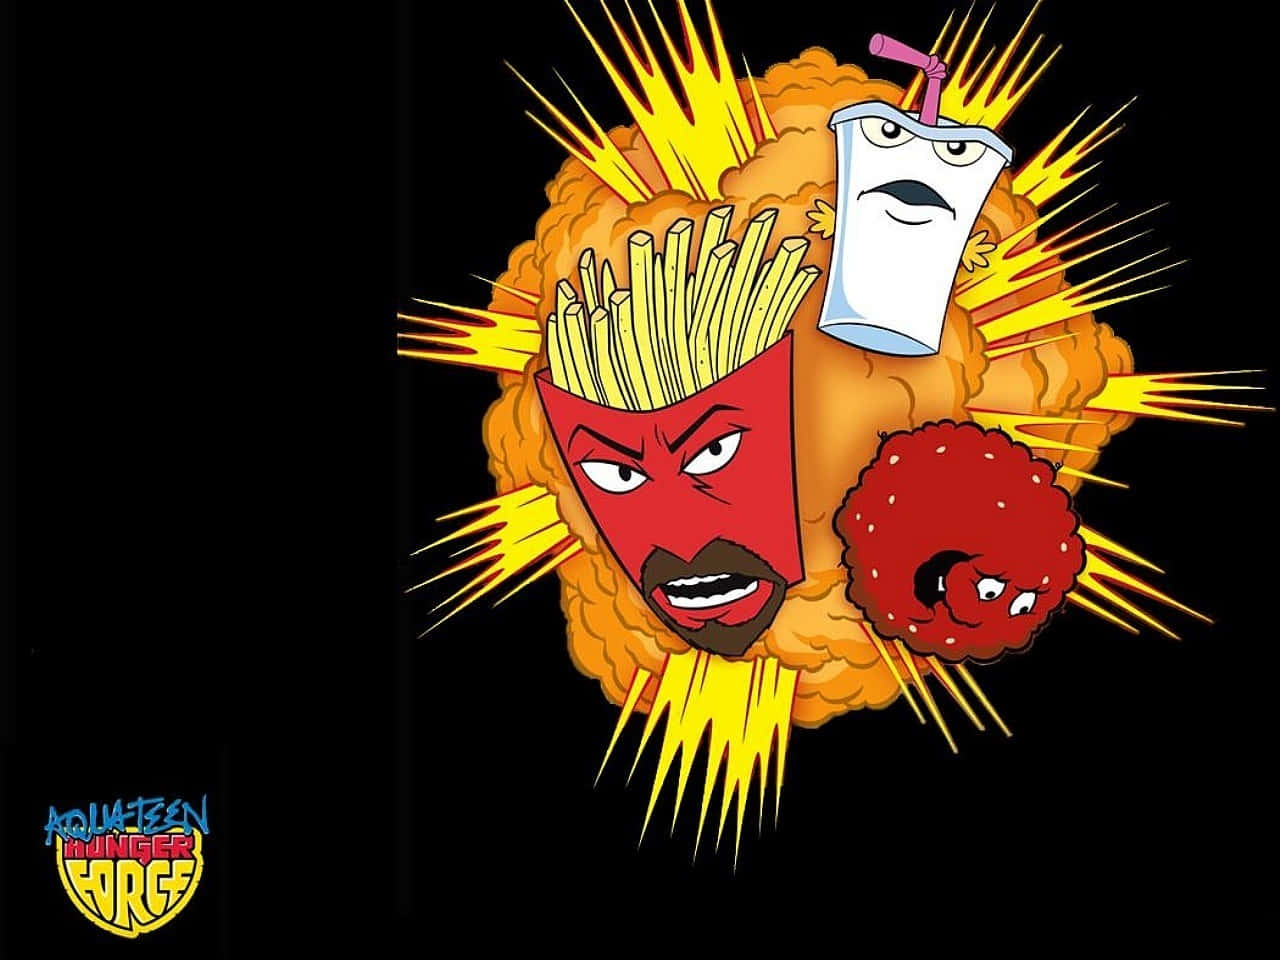 Aqua Teen Hunger Force Gang in their Classic Pose